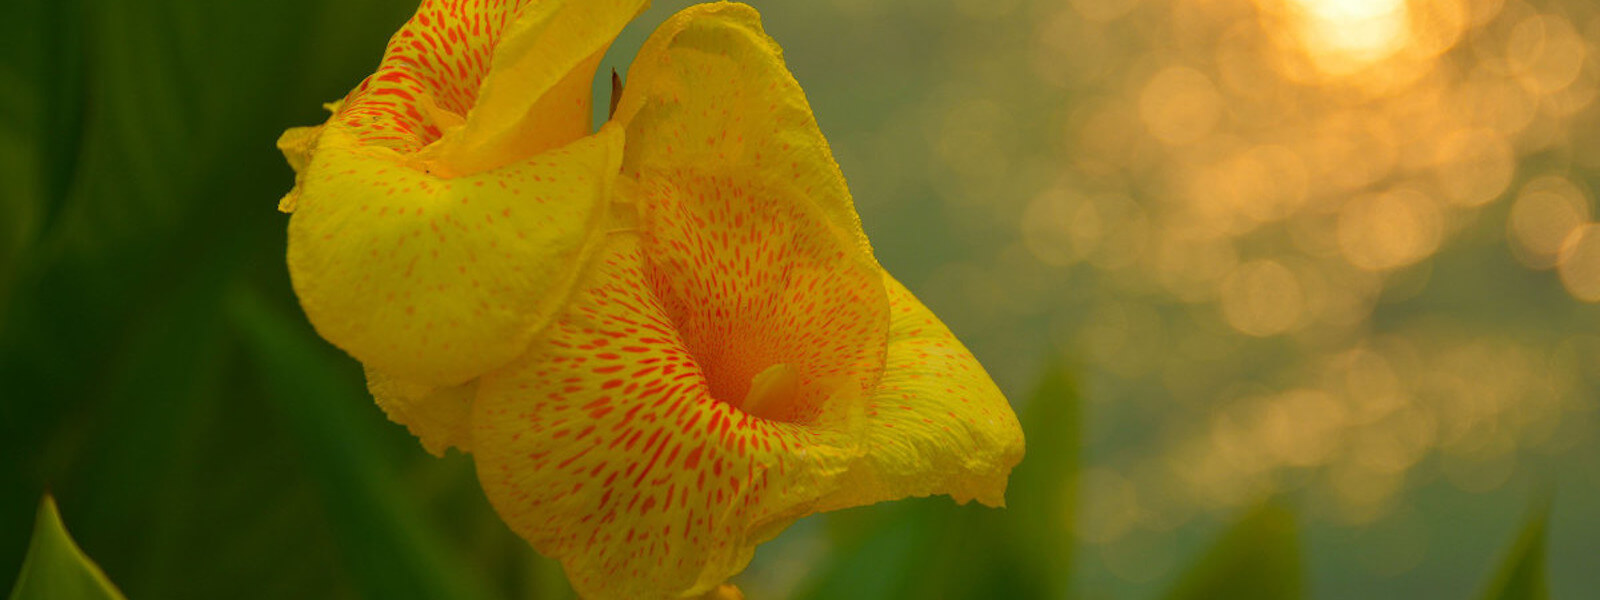 A yellow monkey flower before a blurred out background.